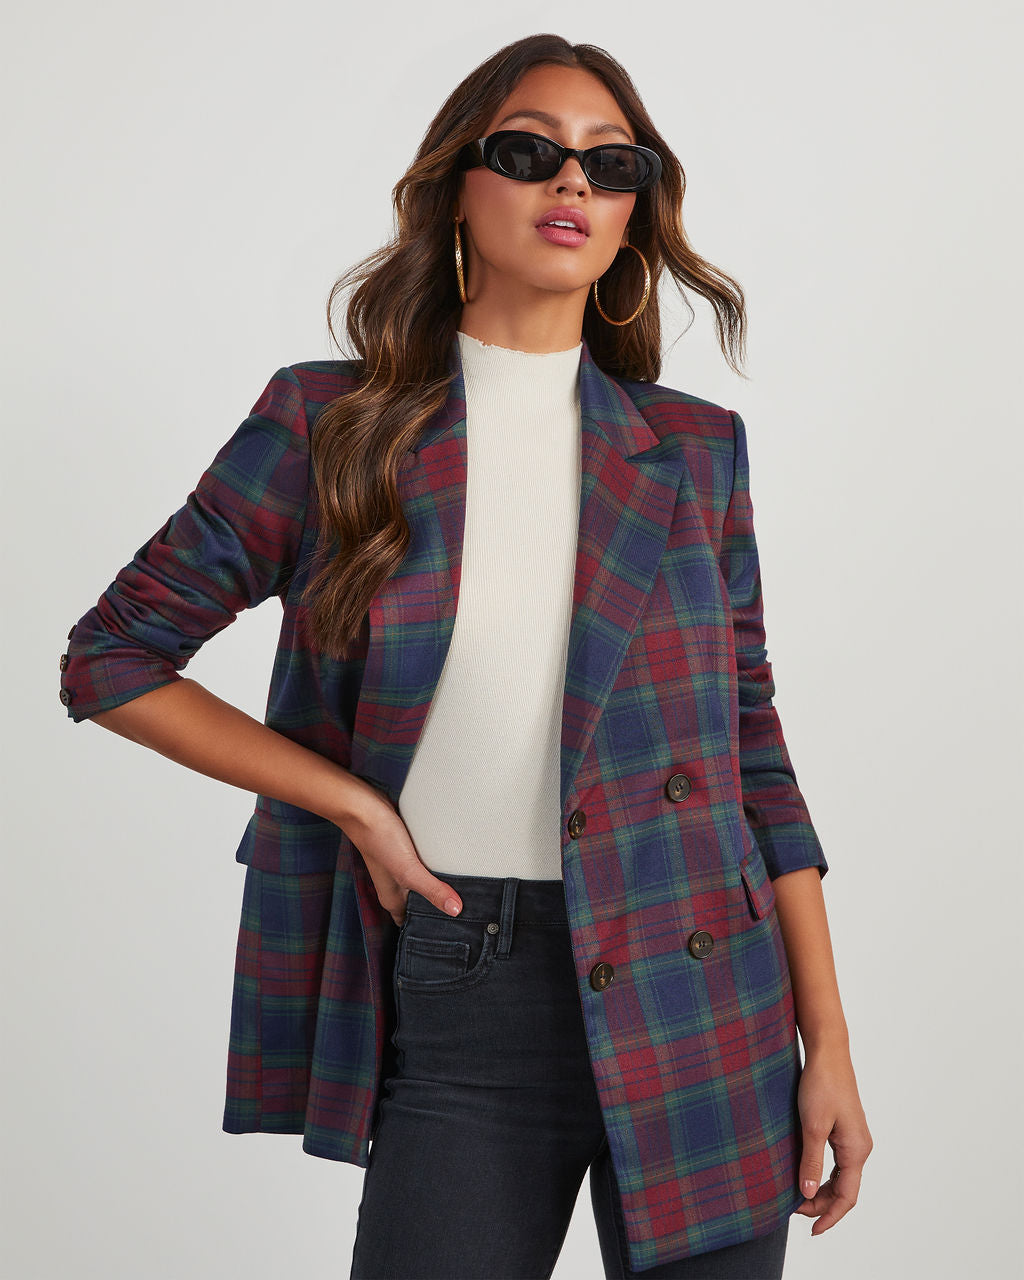 VICI - A Neutral Plaid Blazer Can Be Styled Over Everything. We love how  our doll @averykaspari elevated our In Motion Sports Bra + Legging with the  Glasgow Pocketed Herringbone Blazer. A